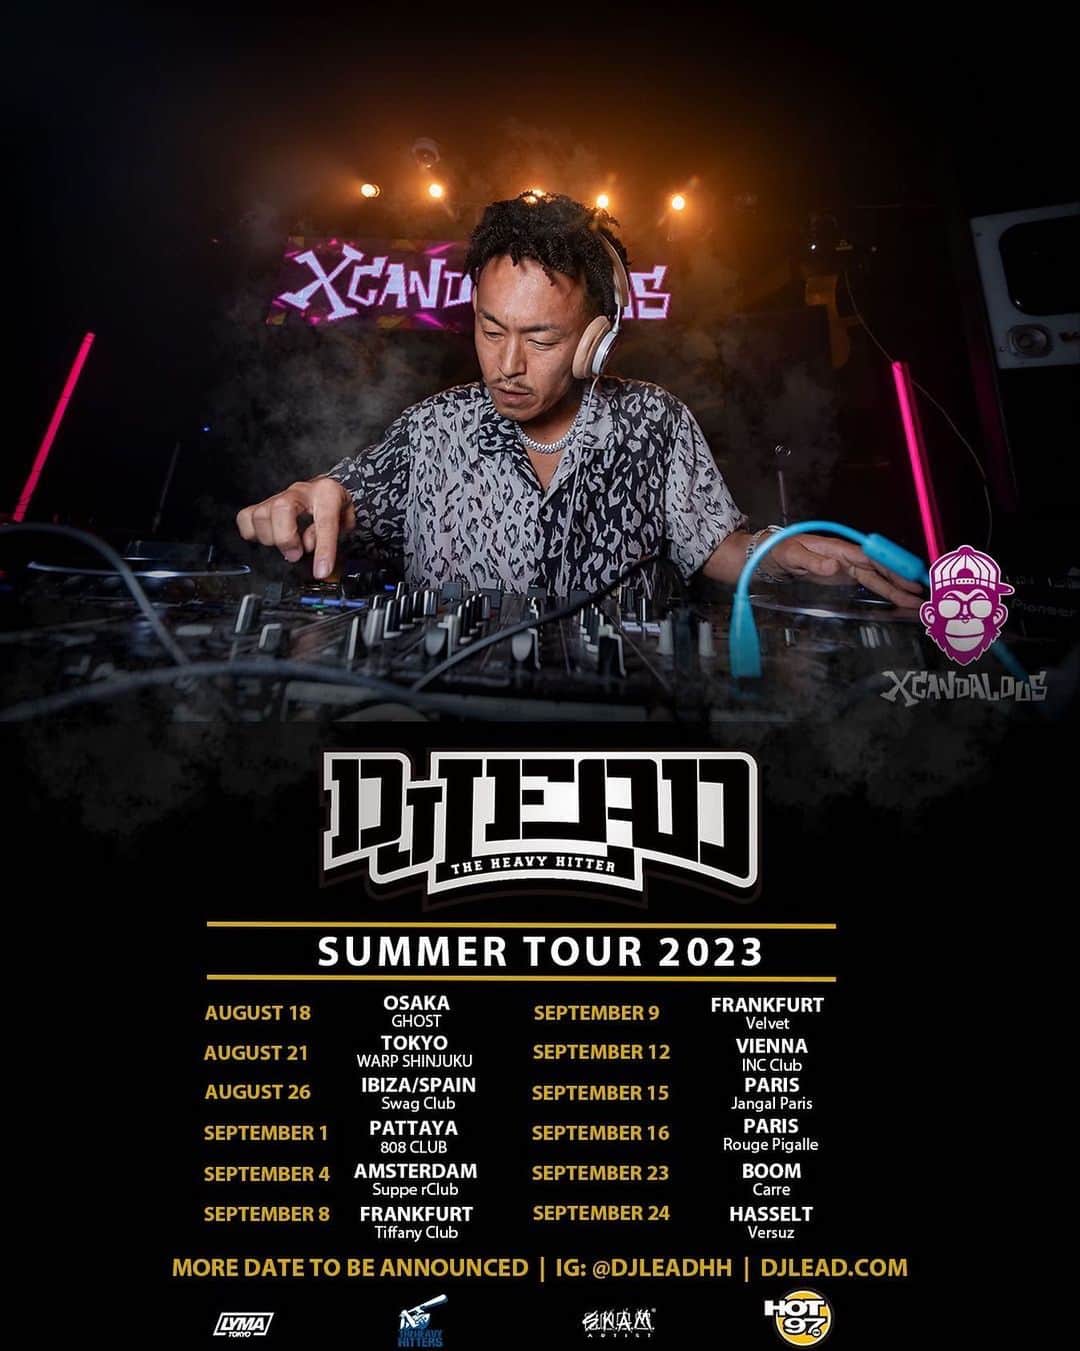 DJ LEADのインスタグラム：「DJ LEAD SUMMER TOUR 2023  🇪🇸🇹🇭🇳🇱🇩🇪🇦🇹🇫🇷🇧🇪 August 26th at Swag in Ibiza  Sept  1st at 808 in Pattaya  4th at Supperclub in Amsteldam  8th Tiffany club in Frankfurt  9th Velvet in Frankfurt  12th INC CLUB In Vienna  15th at Jangal in Paris  16th at Rouge Pigalle in Paris  23 Versuz in Hasselt  24 Carré  in Boom   Designed by @iamdjmartin_   Thank you everyone for makin happen」